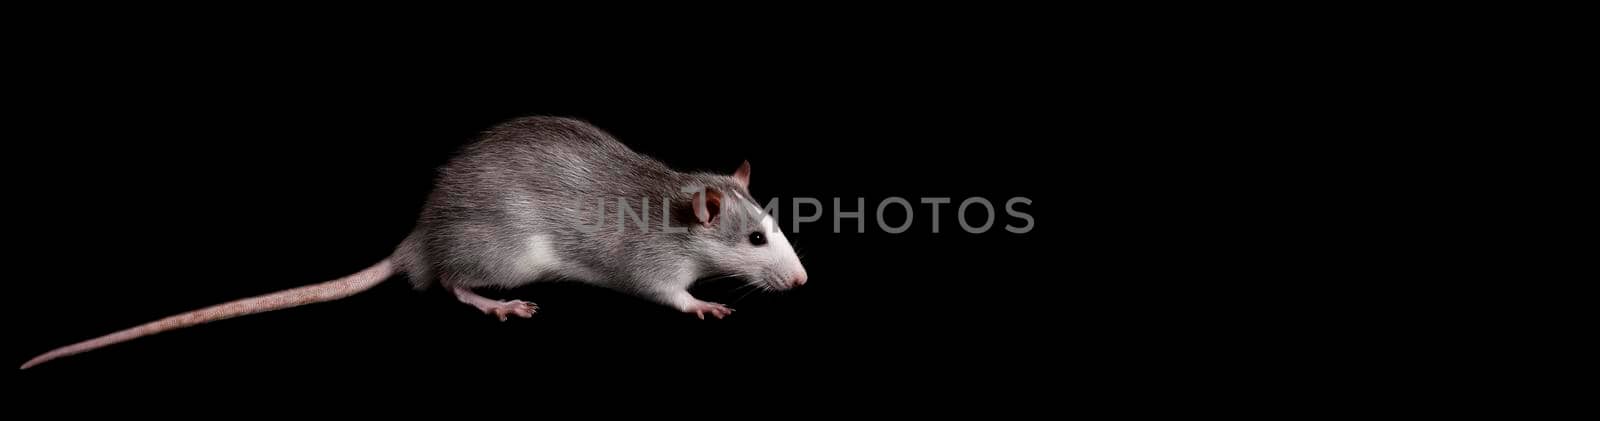 Gray rat isolated on dark black background. Rodent pet. Domesticated rat close up. The rat is looking at the camera. Long poster format